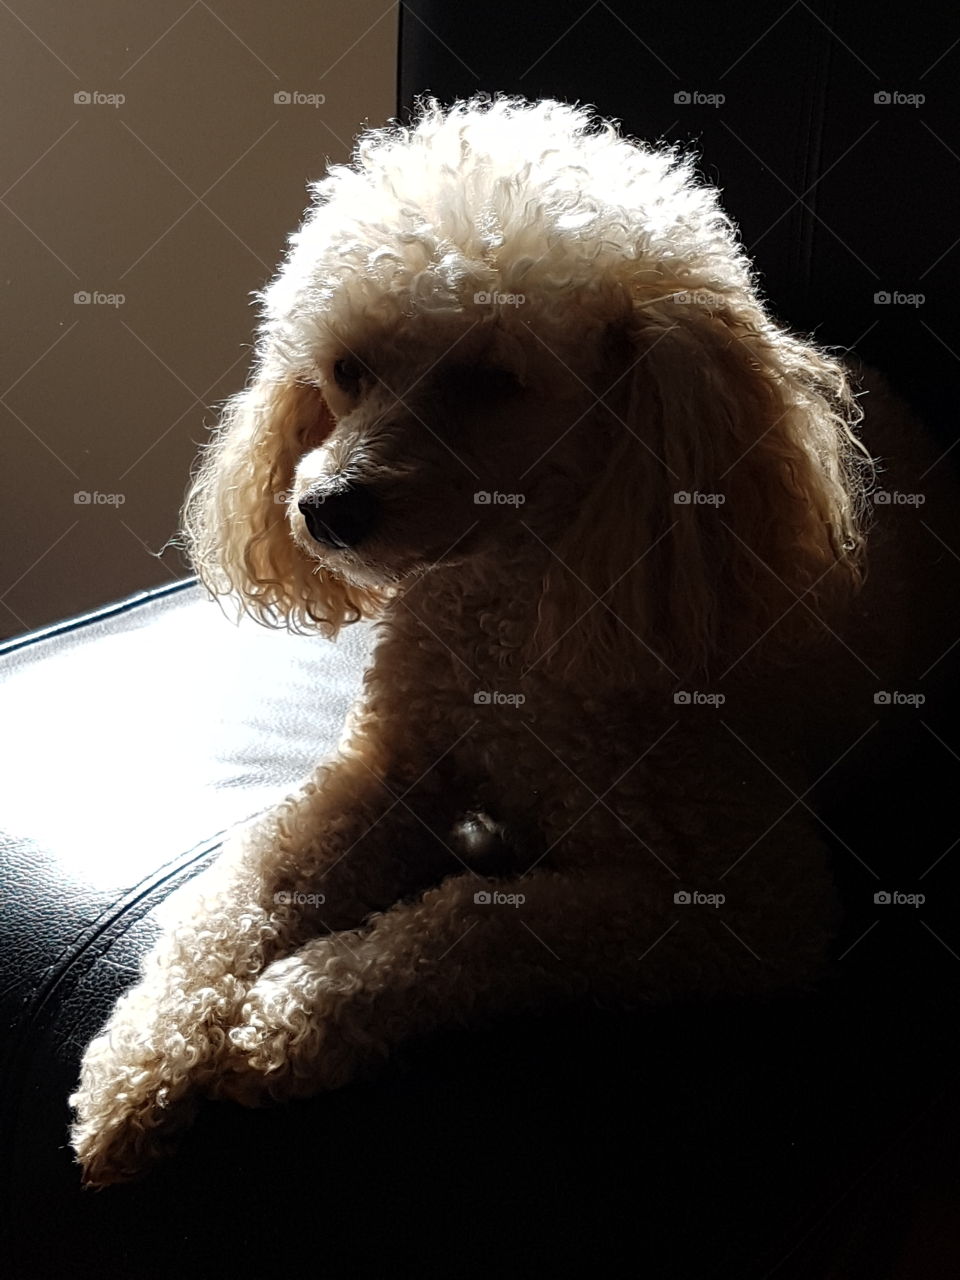 A toy poodle in shadow.